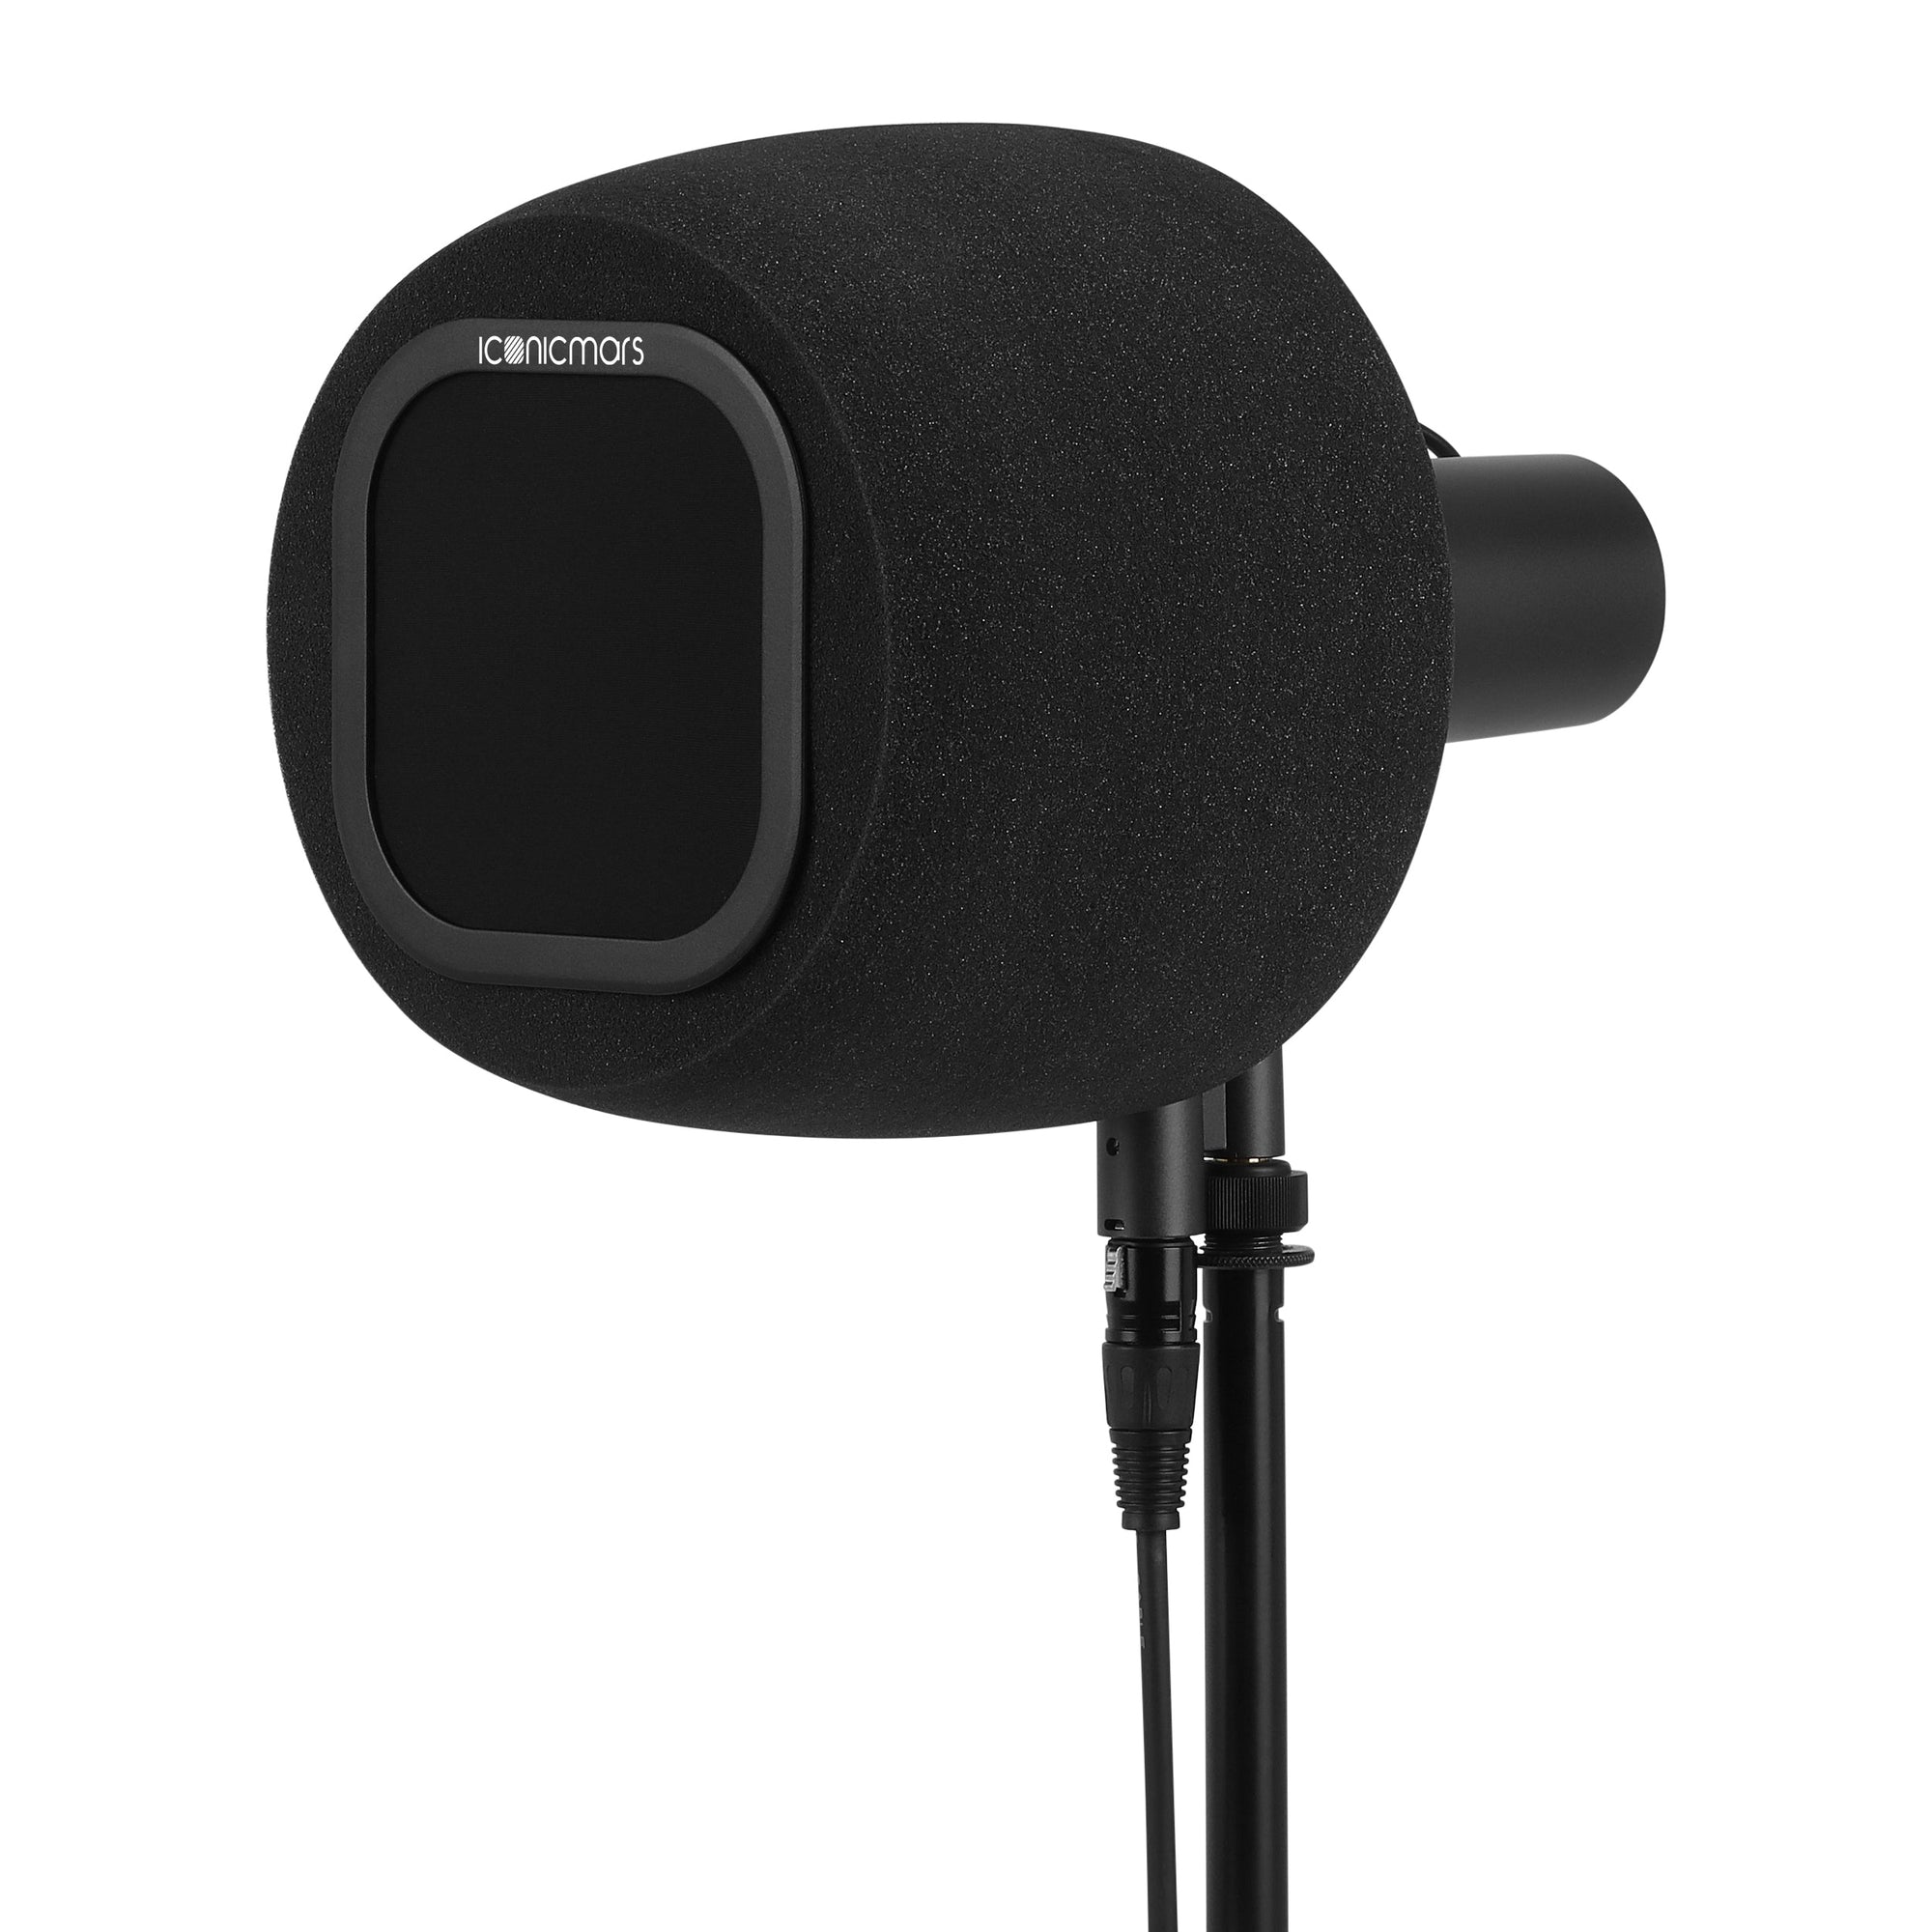 Comet X7B side with pop filter stand with eyeball like design for front facing microphone like Shure SM7B  -- Galaxy Black